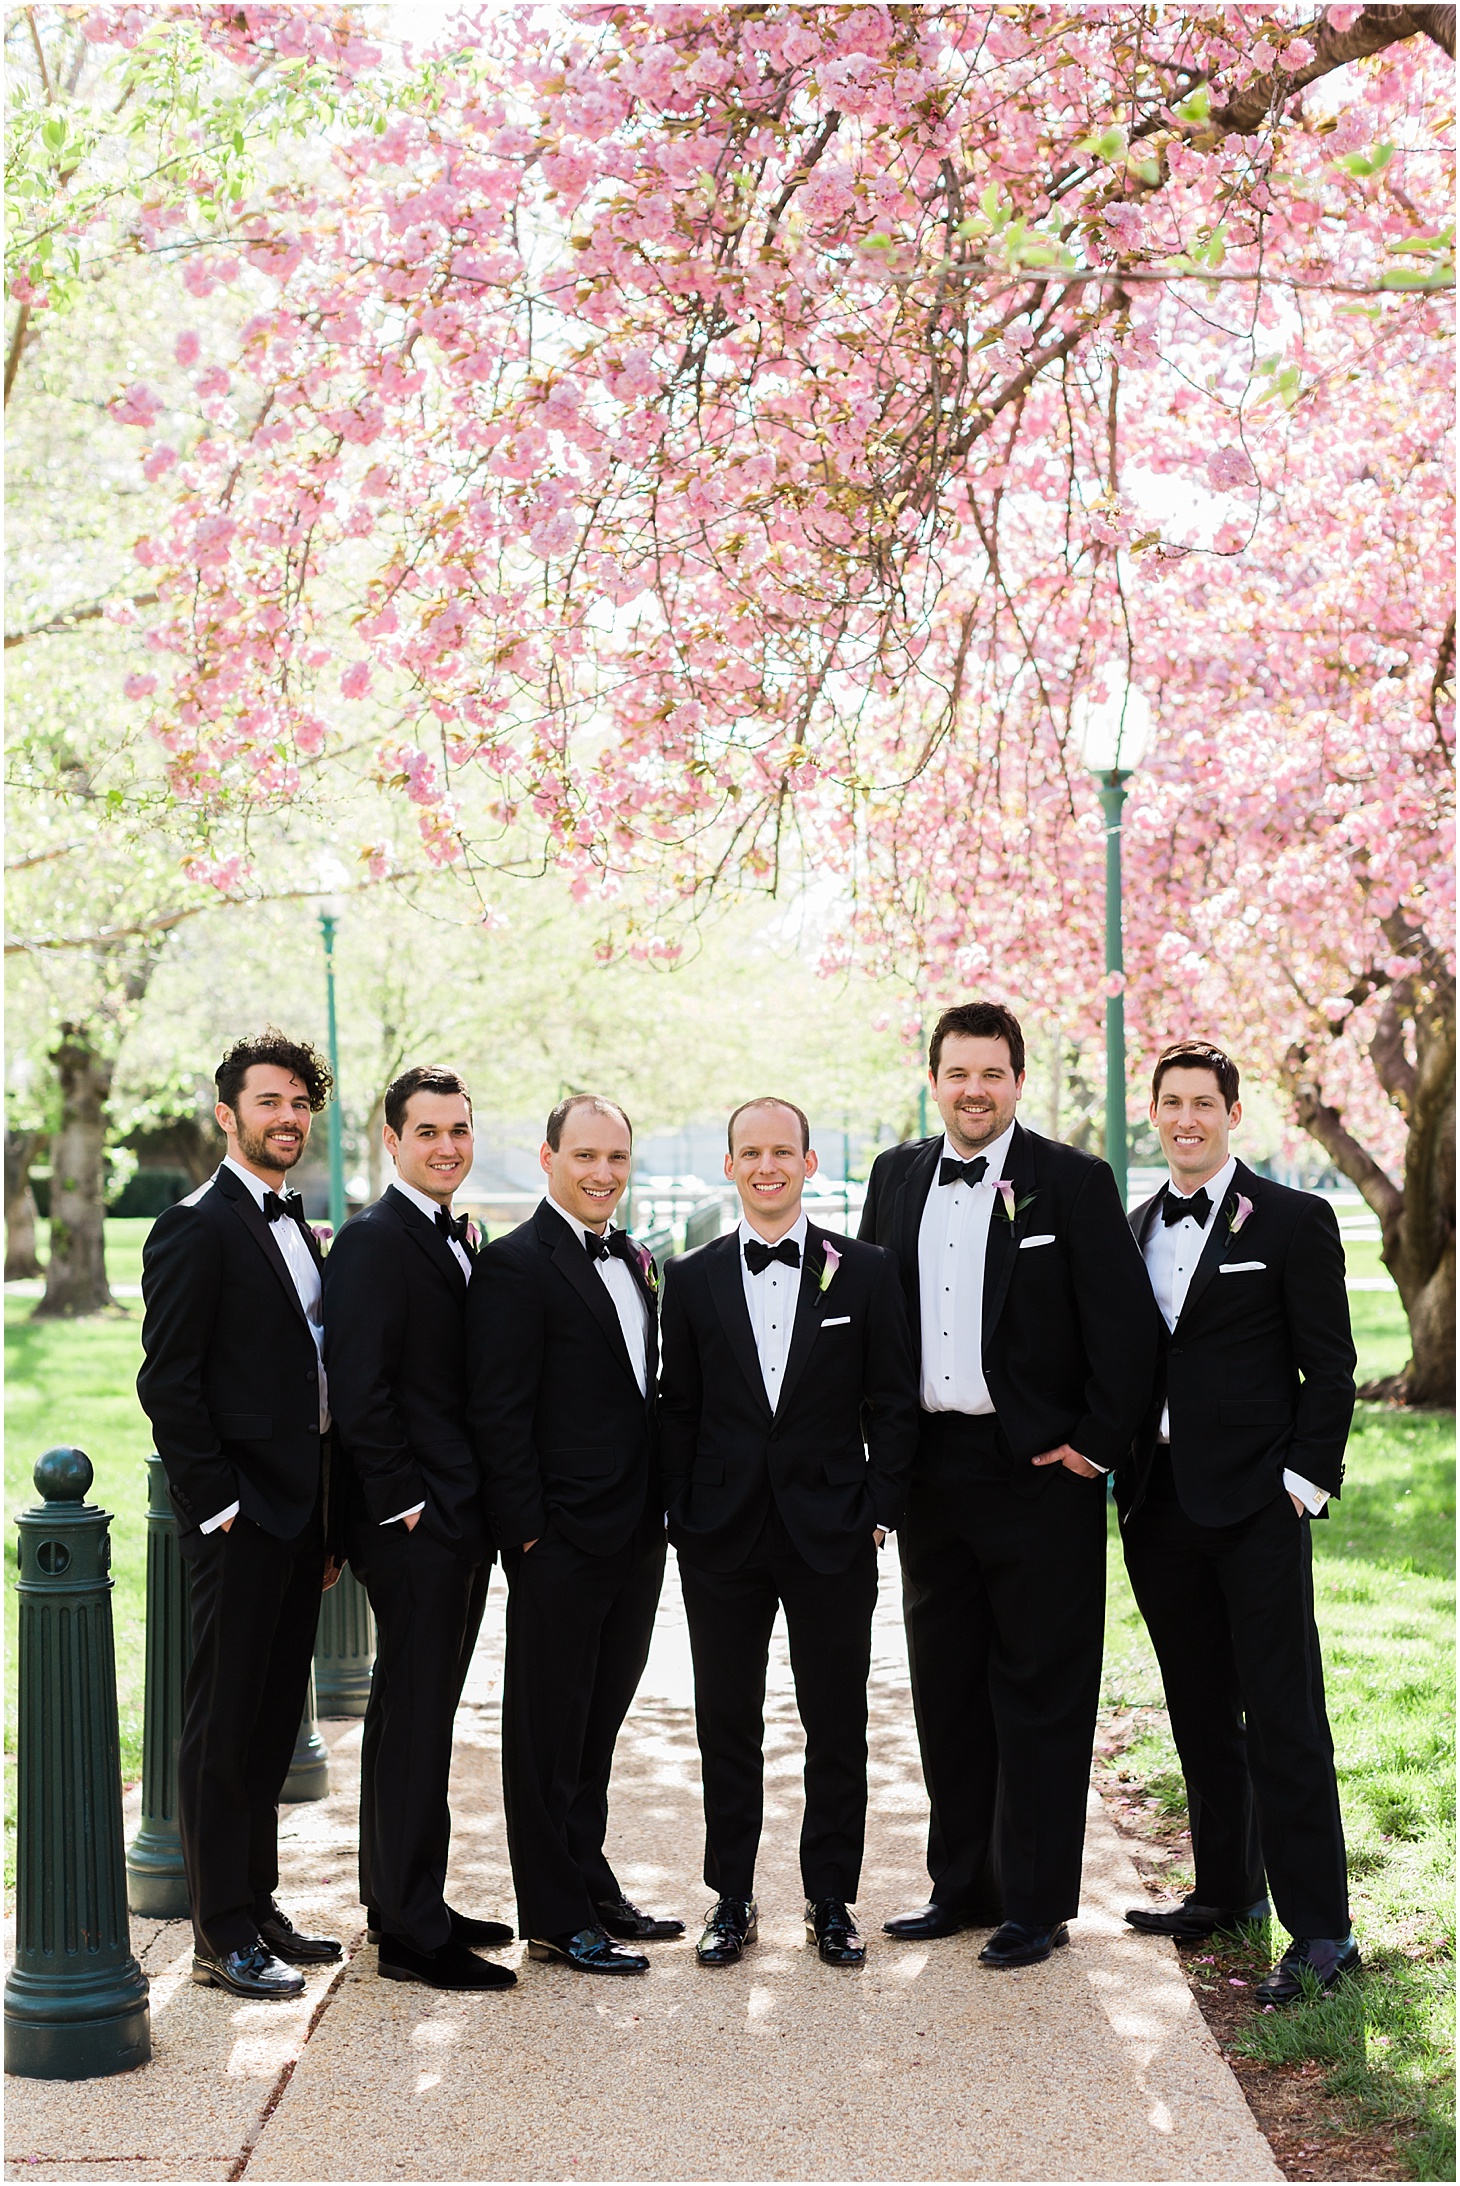 Wedding Party Portraits Under Cherry Trees, Museum-Inspired Spring Wedding at National Museum of Women in the Arts, Sarah Bradshaw Photography, DC Wedding Photographer